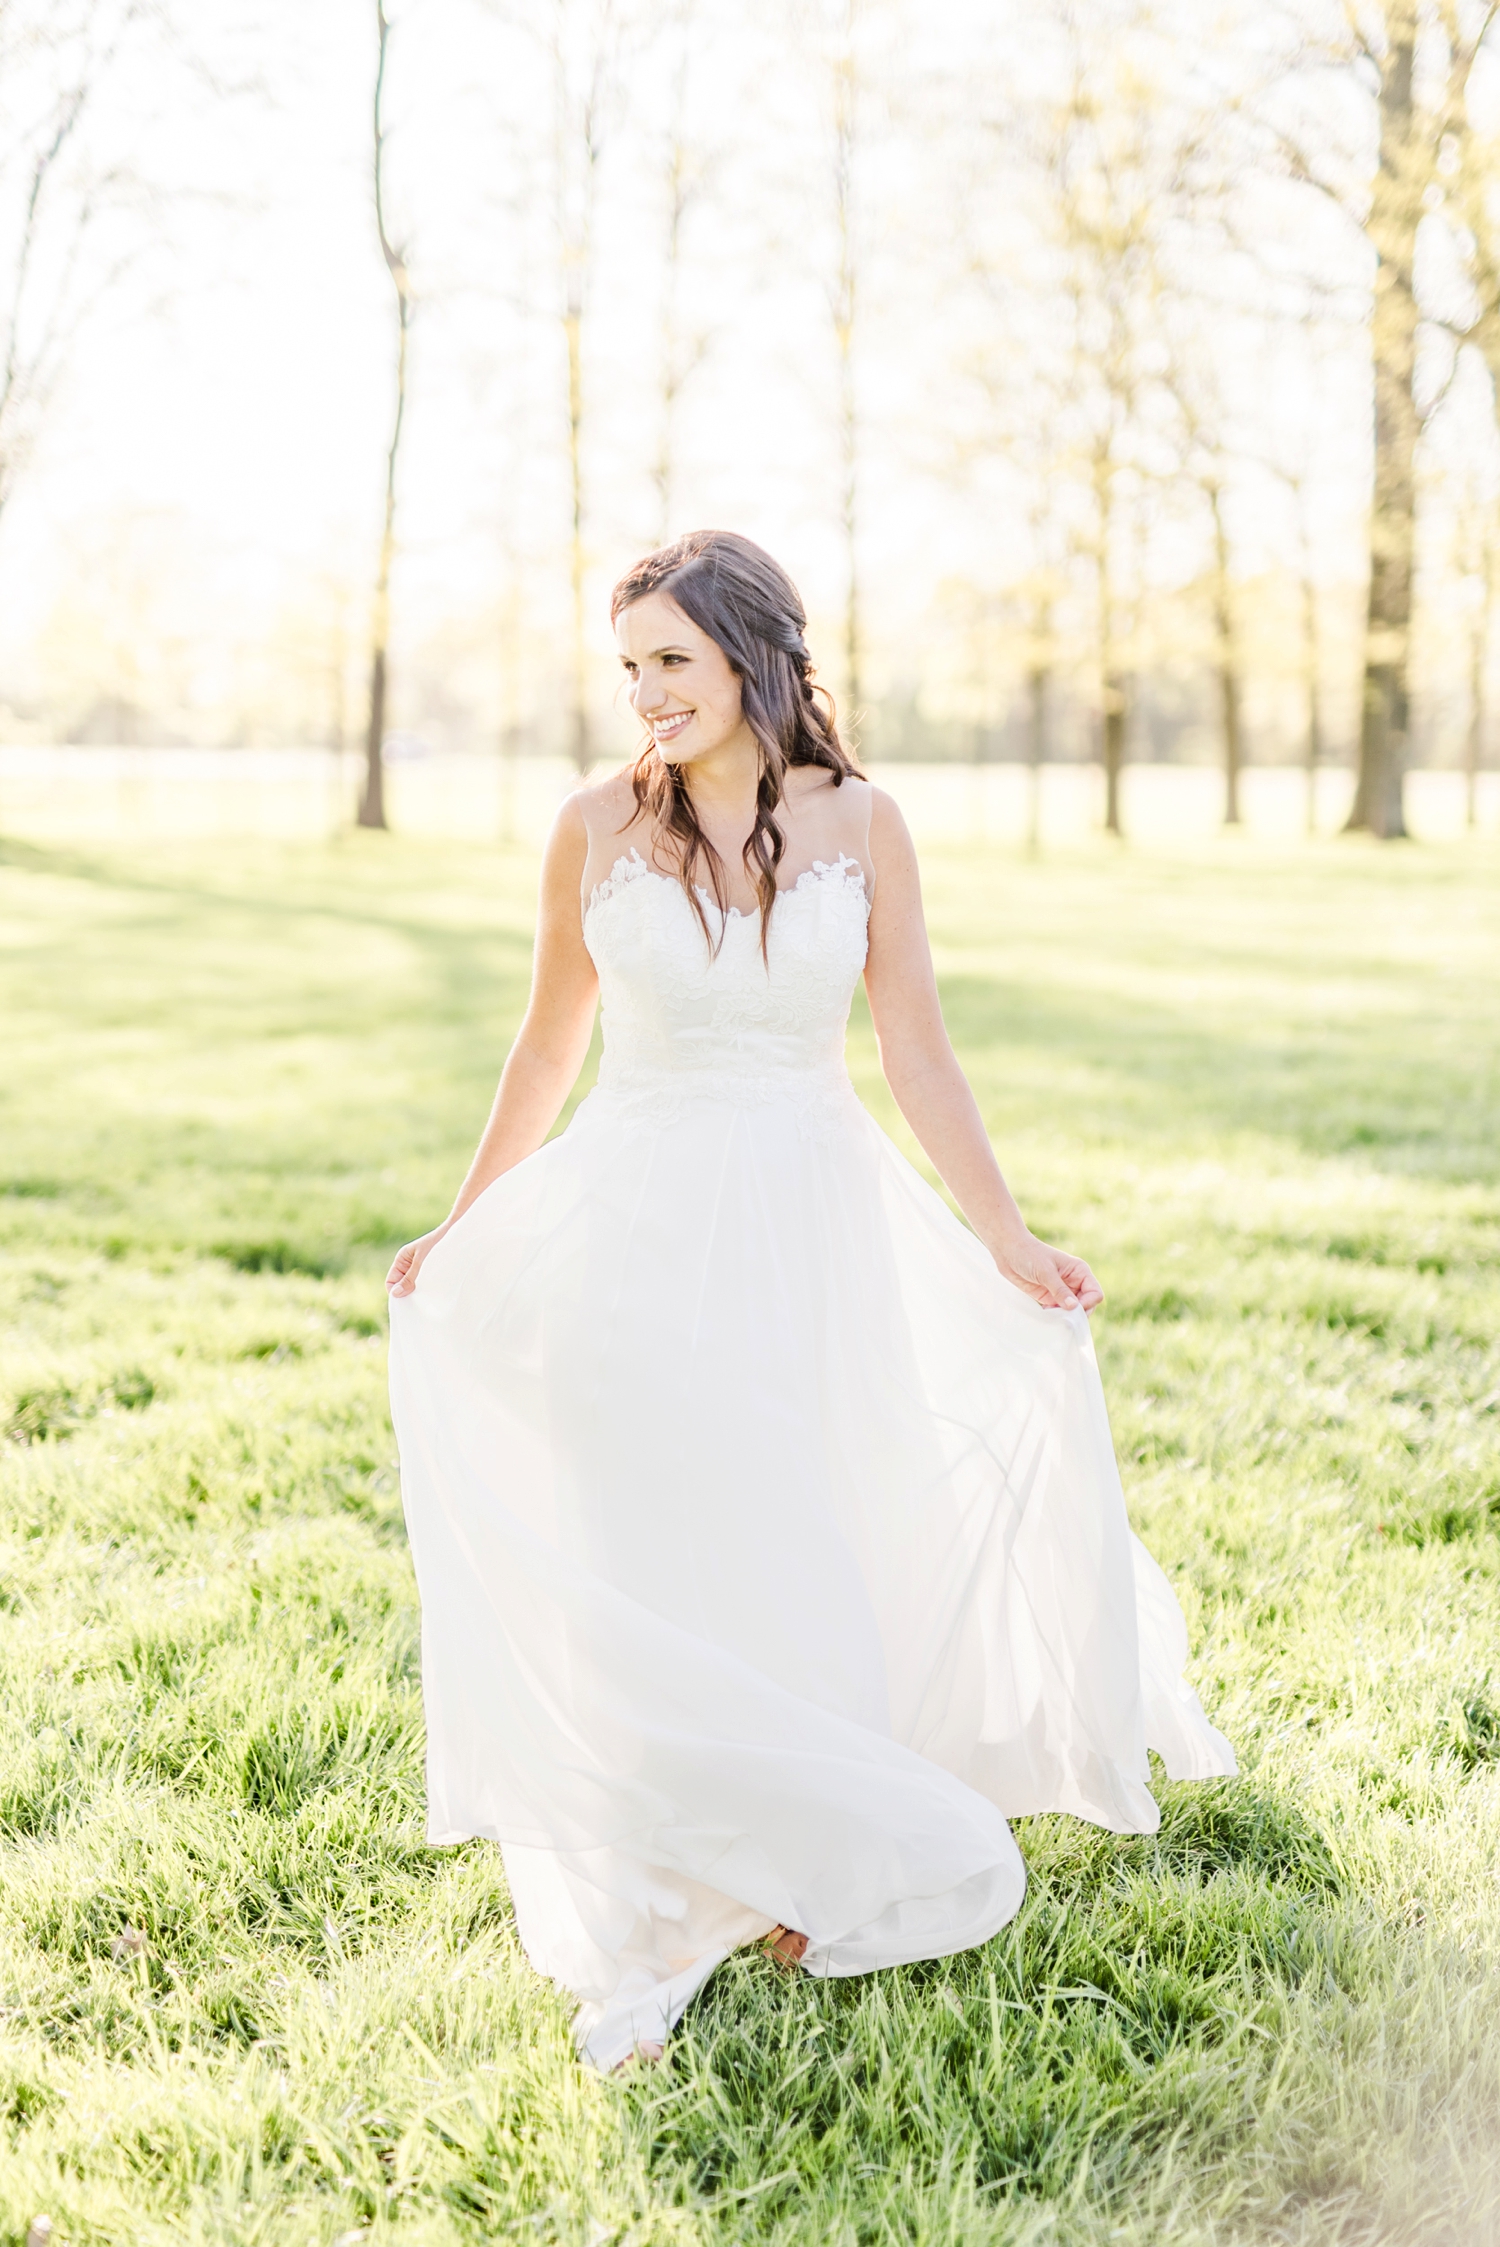 bride-walking-with-a-flowy-wedding-dress-in-the-wind-thorugh-a-sunset-field